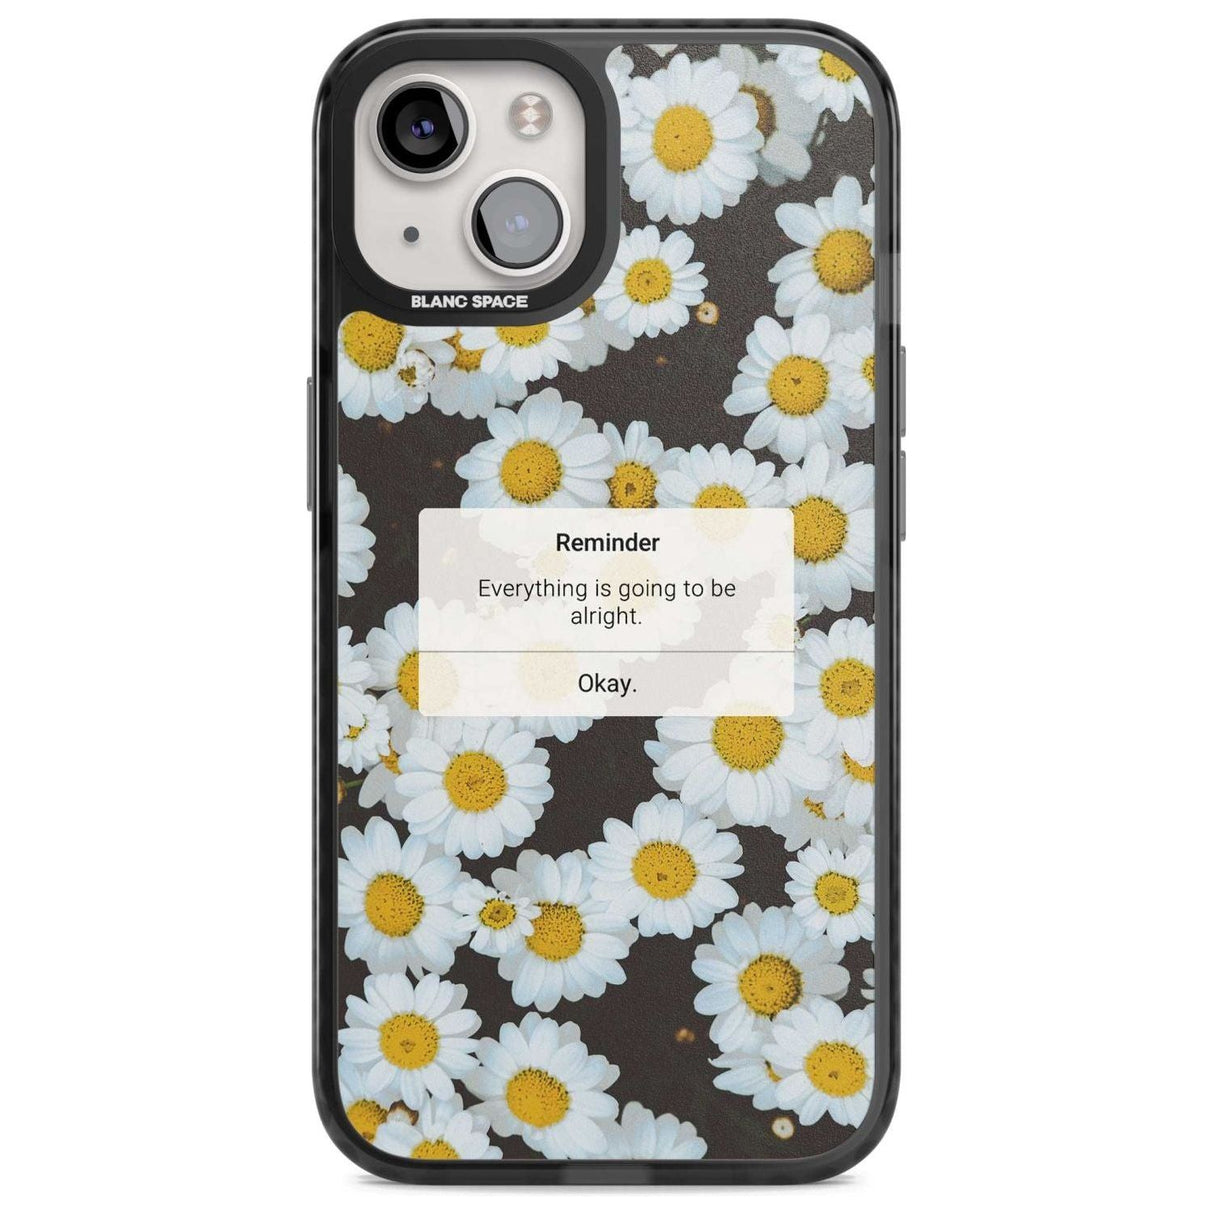 "Everything will be alright" iPhone Reminder Phone Case iPhone 15 Plus / Magsafe Black Impact Case,iPhone 15 / Magsafe Black Impact Case,iPhone 14 Plus / Magsafe Black Impact Case,iPhone 14 / Magsafe Black Impact Case,iPhone 13 / Magsafe Black Impact Case Blanc Space